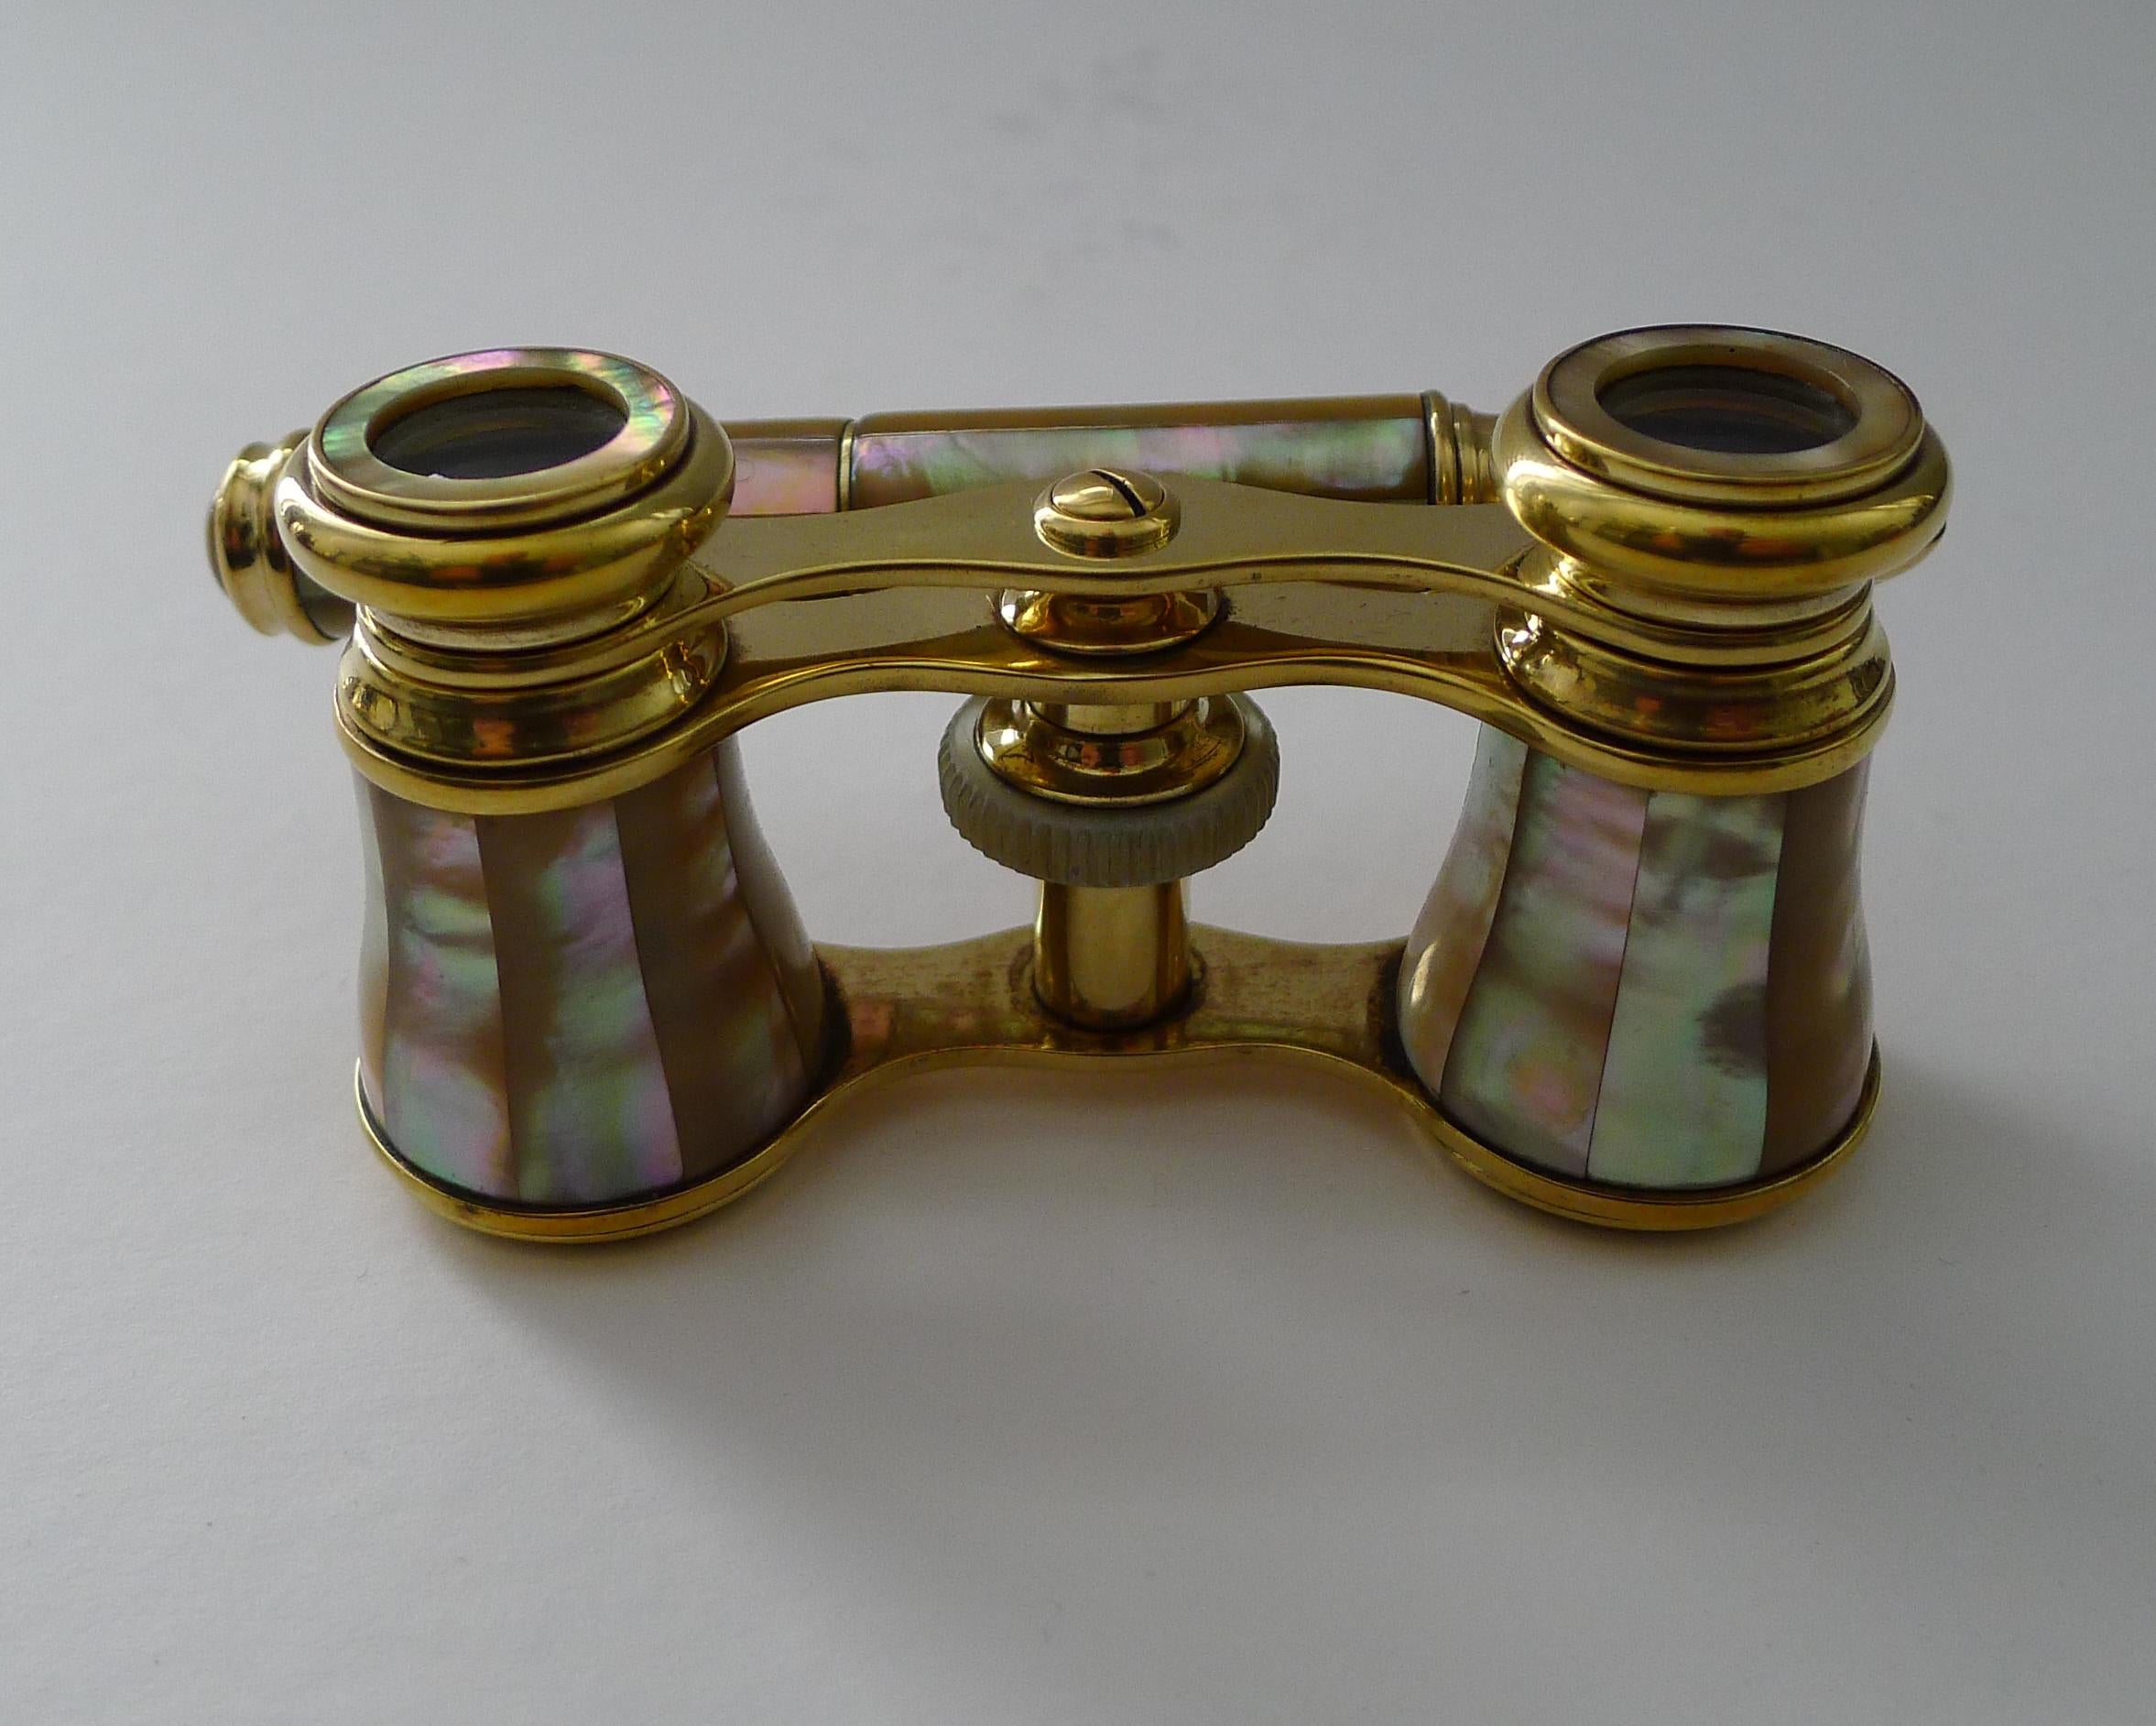 French Asprey, London - Pair Mother of Pearl Opera Glasses c.1910/1920